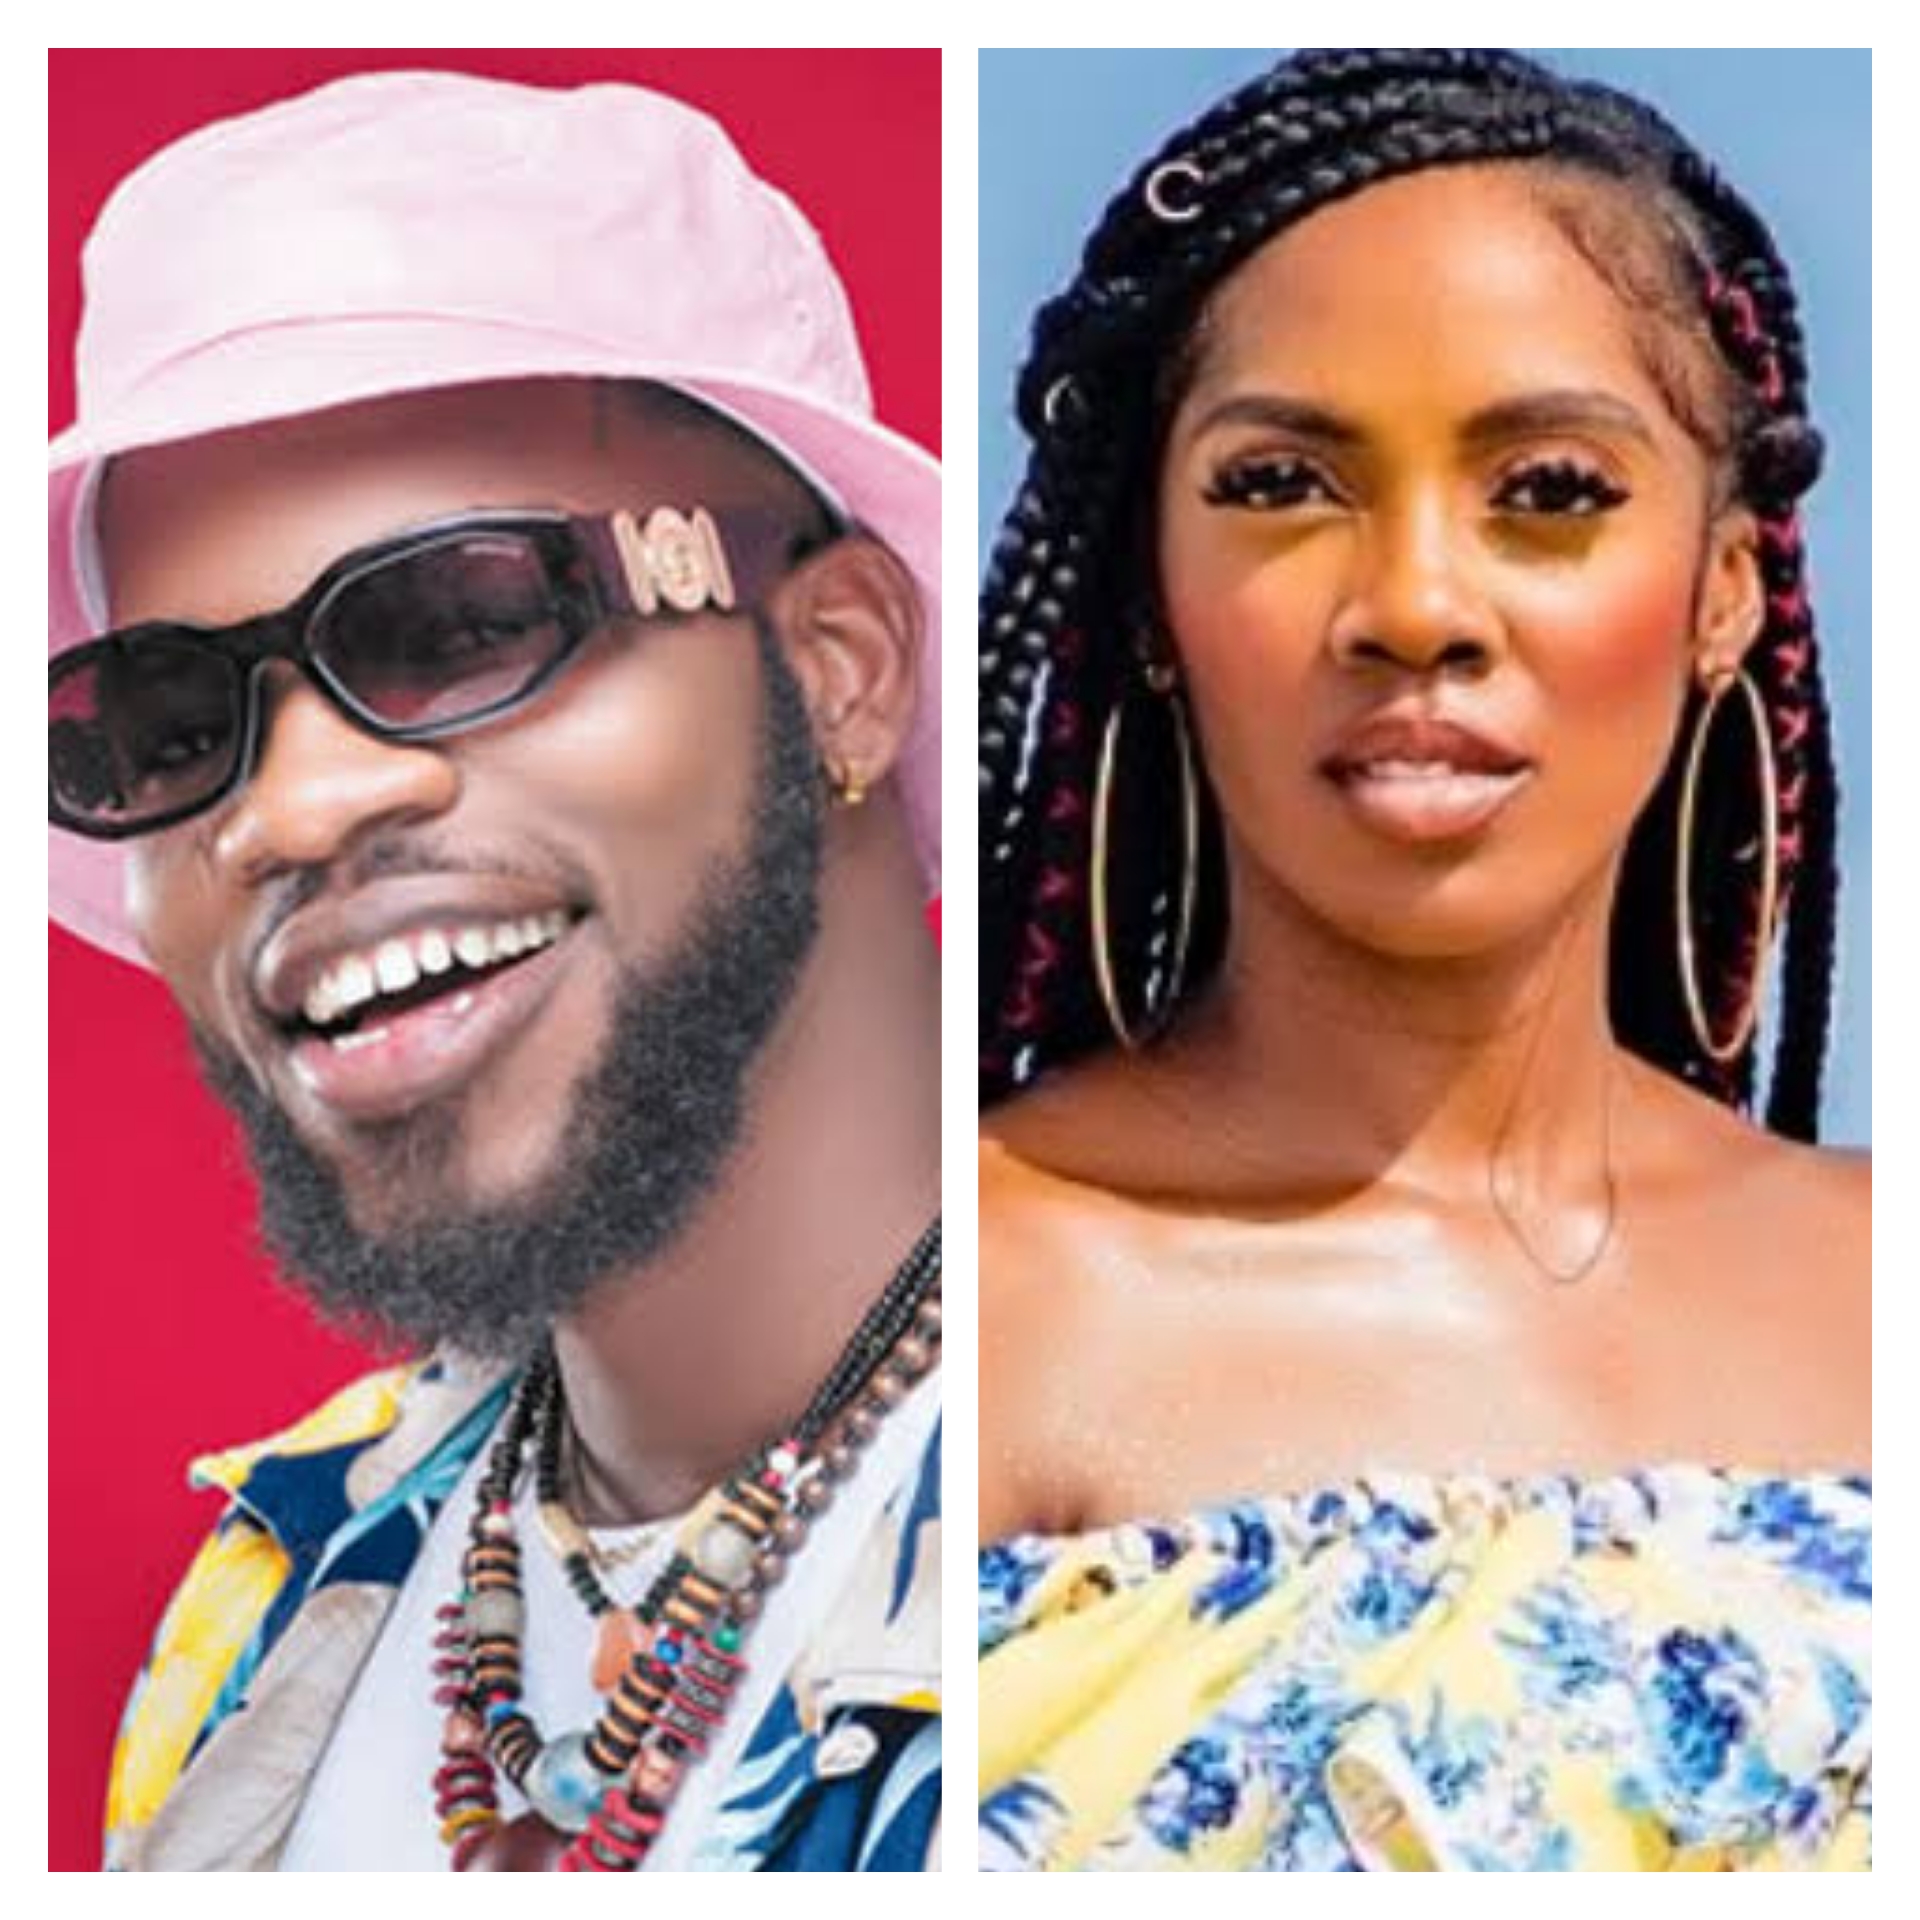 Tiwa Savage Shares An Uplifting Whatsapp Message From Broda Shaggi, Yours Truly, News, March 20, 2023